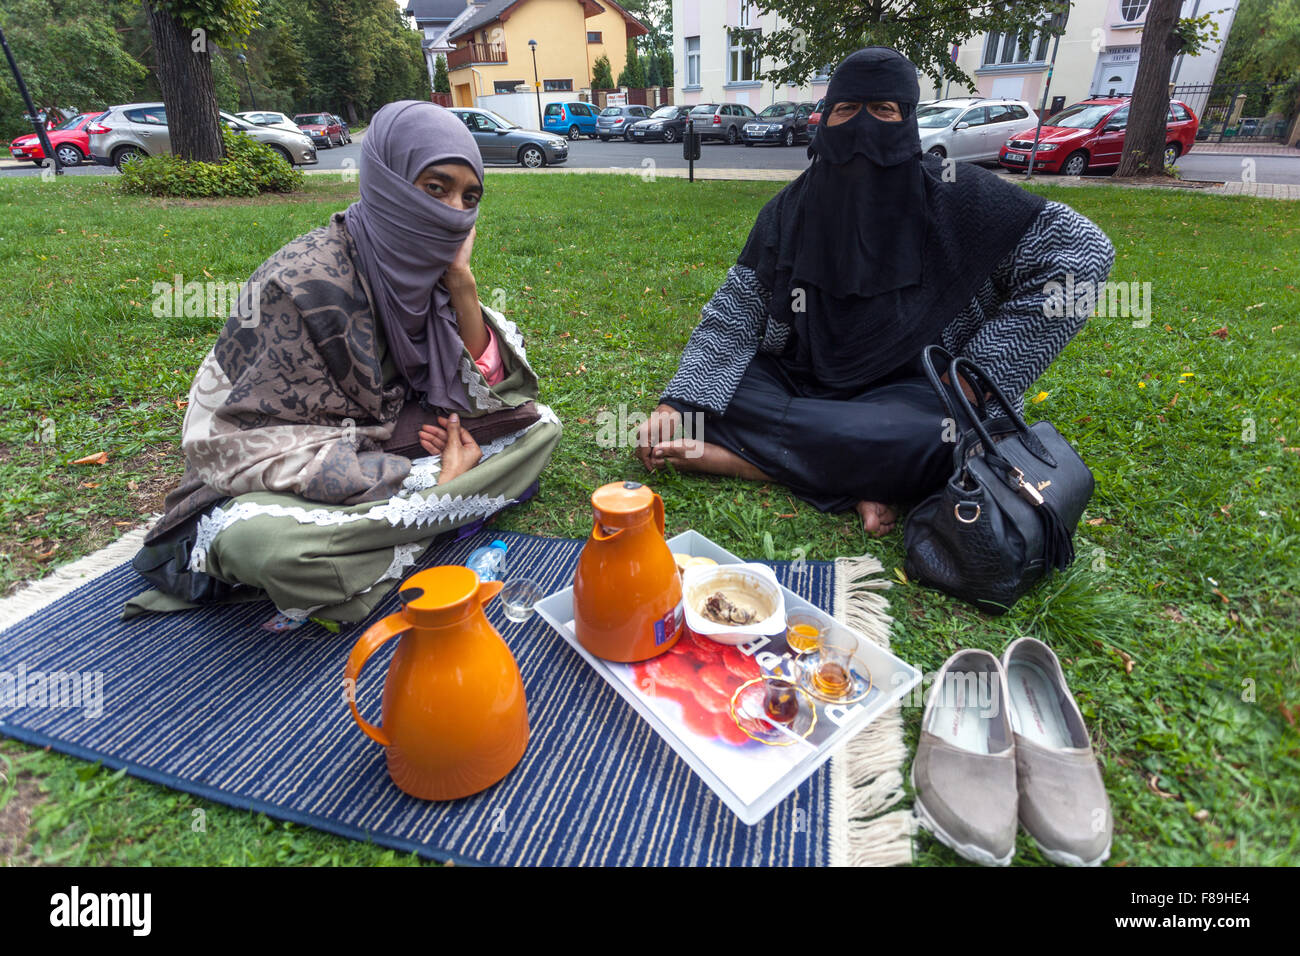 Kuwait women, spa guests, mother and daughter, picnic in the park, North Bohemian spa town. Teplice, Czech Republic Stock Photo